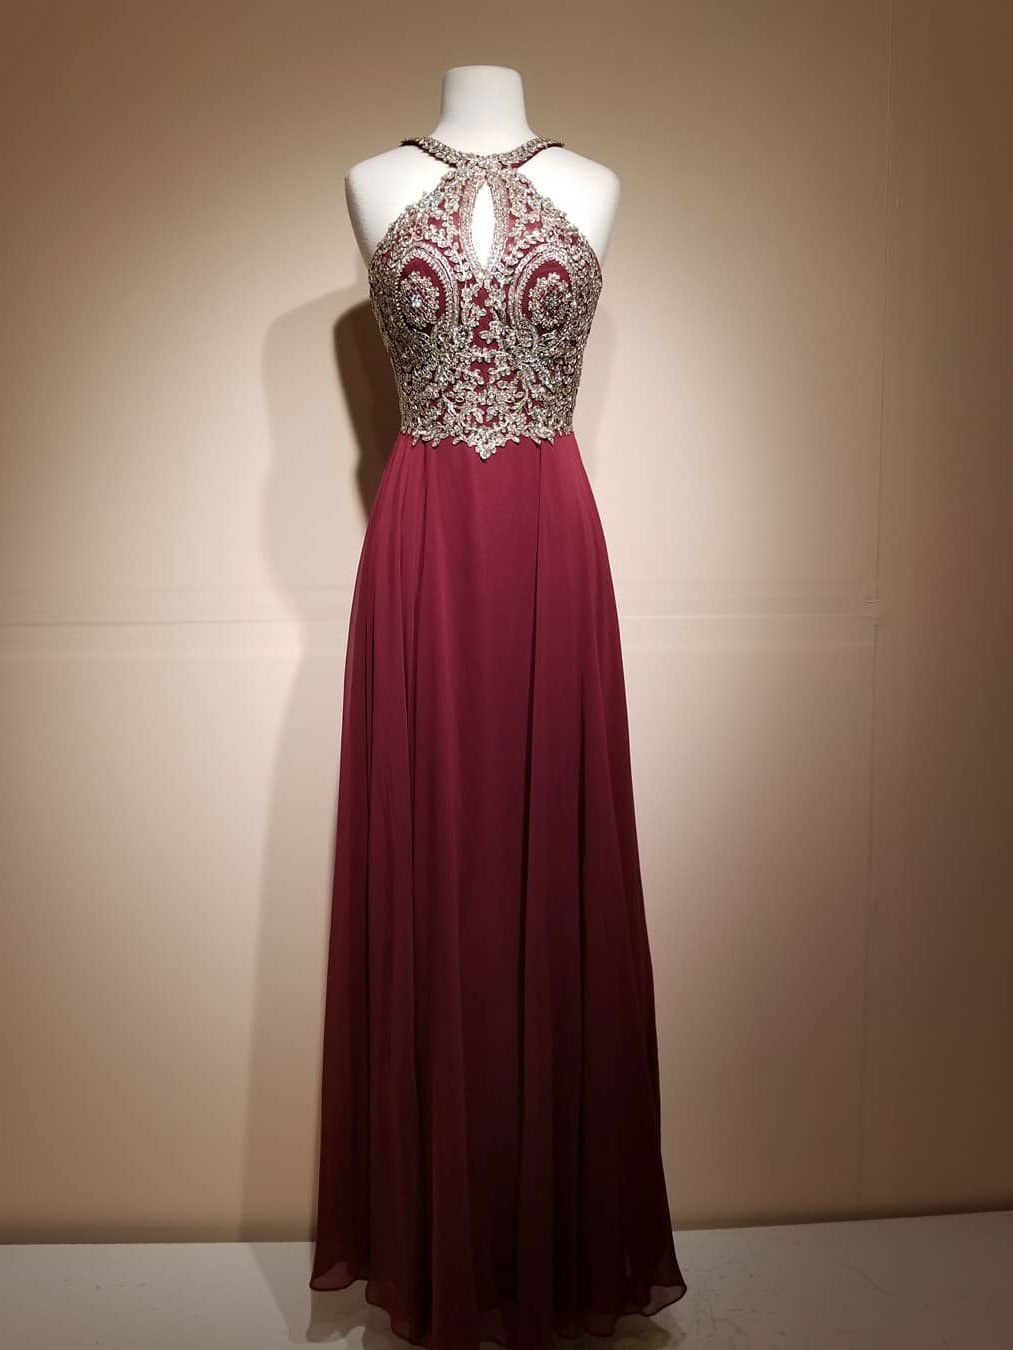 Custom Made Burgundy Long Prom Dress With Silver Lace Formal Prom Party Dresses ,plus Size Women Party Dresses 2019